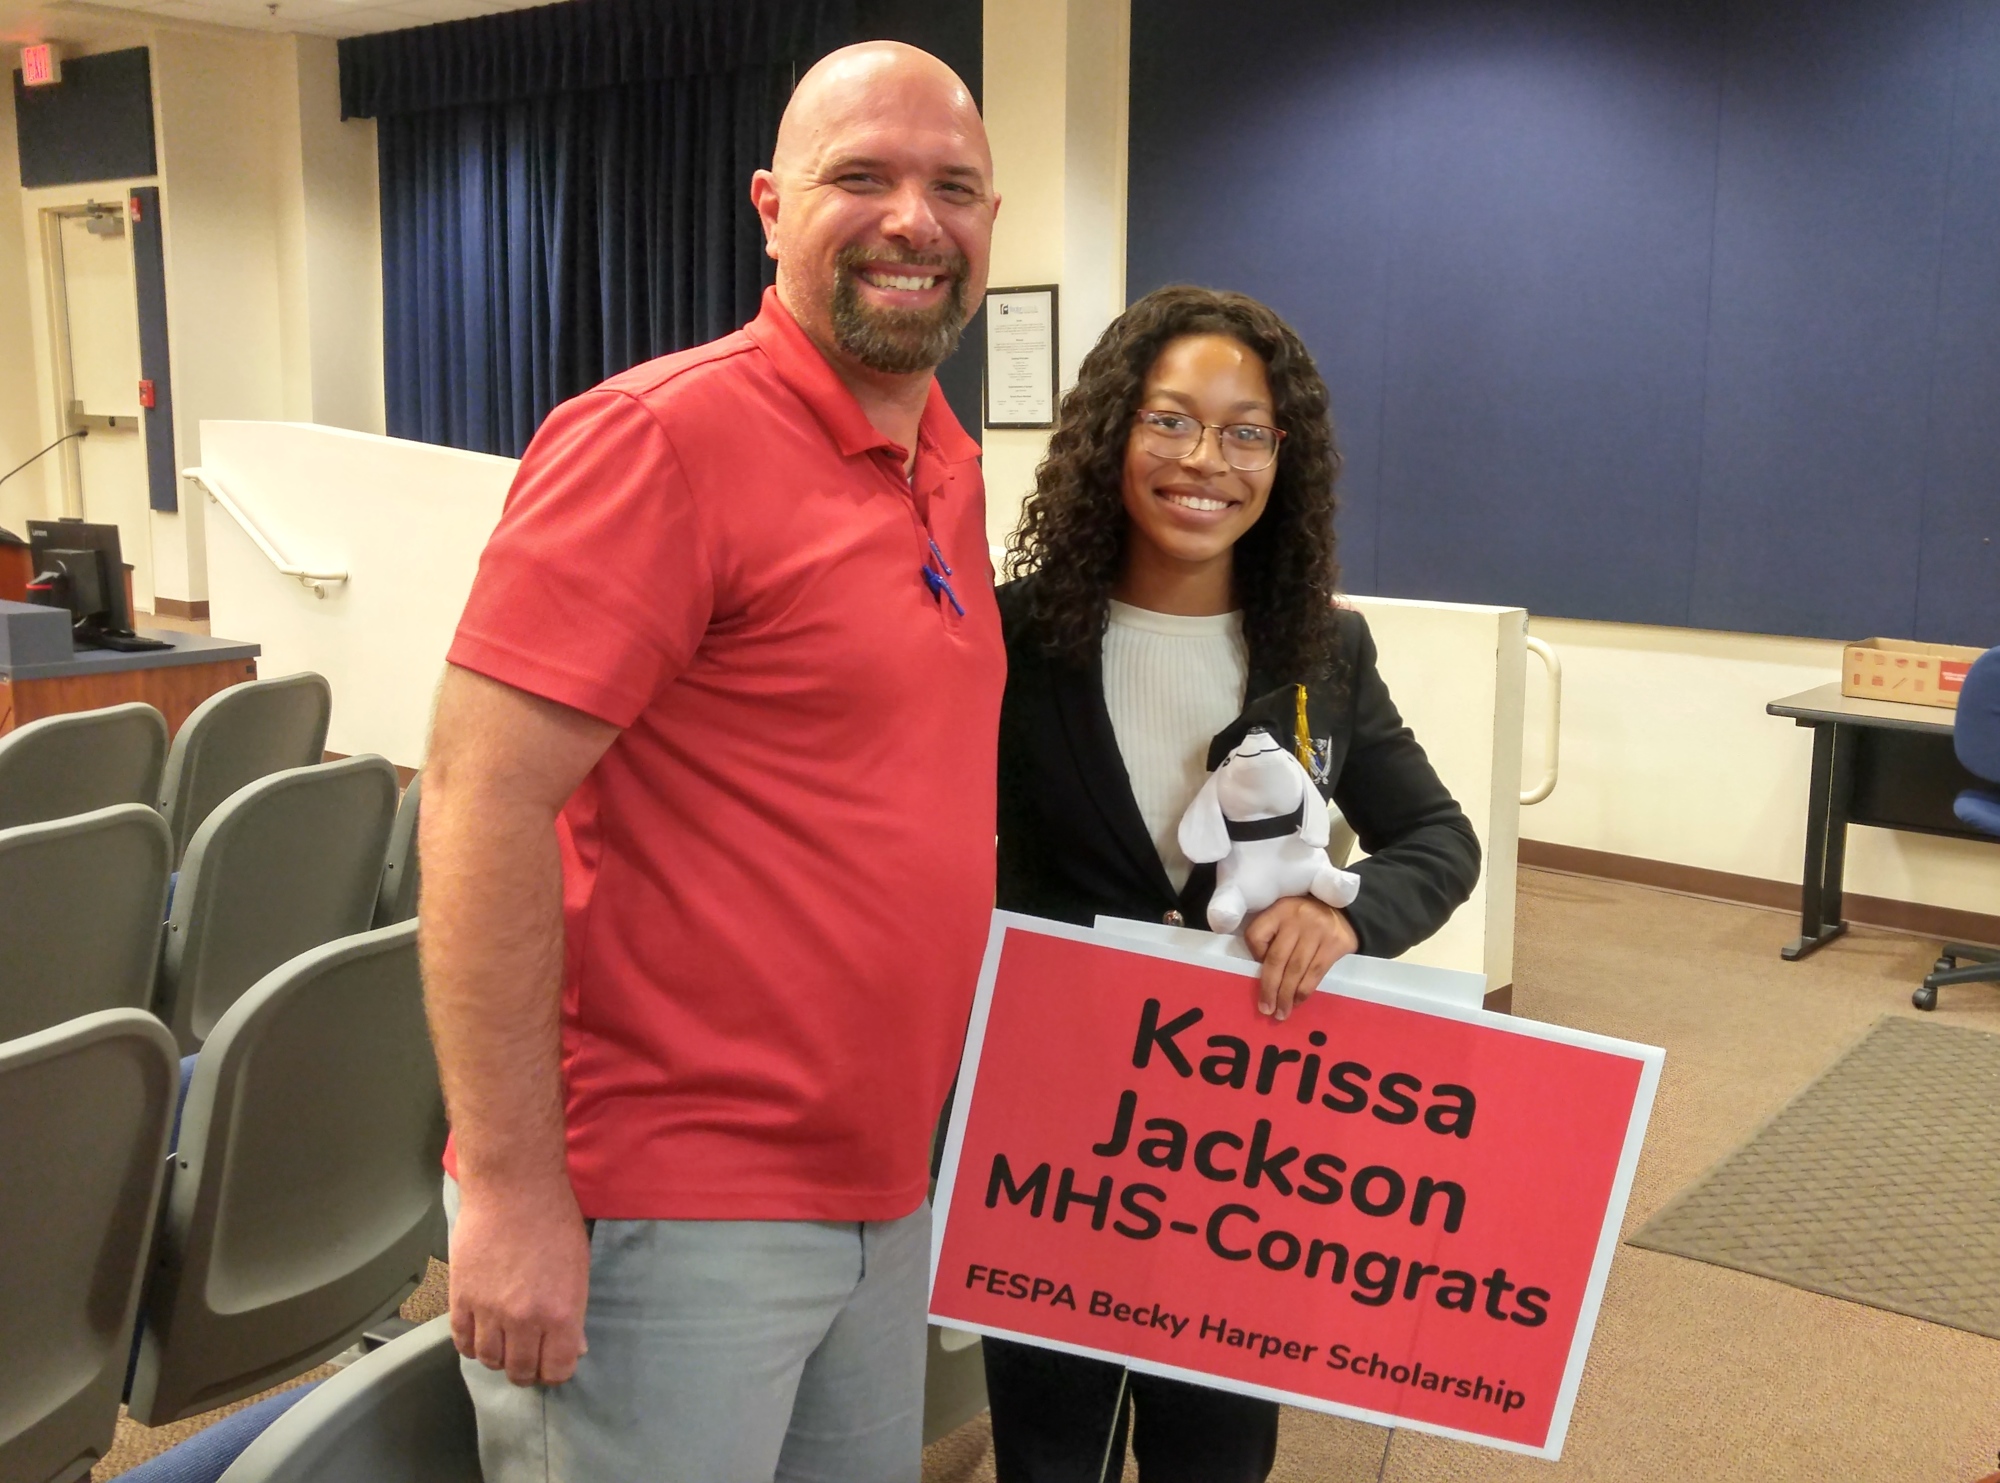 Flagler Educational Support Professional Association president Bron Hudson presents Matanzas graduate Karissa Jackson with a yard sign honoring her as the recipient of the FESPA Becky Harper Scholarship. Photo by Brent Woronoff